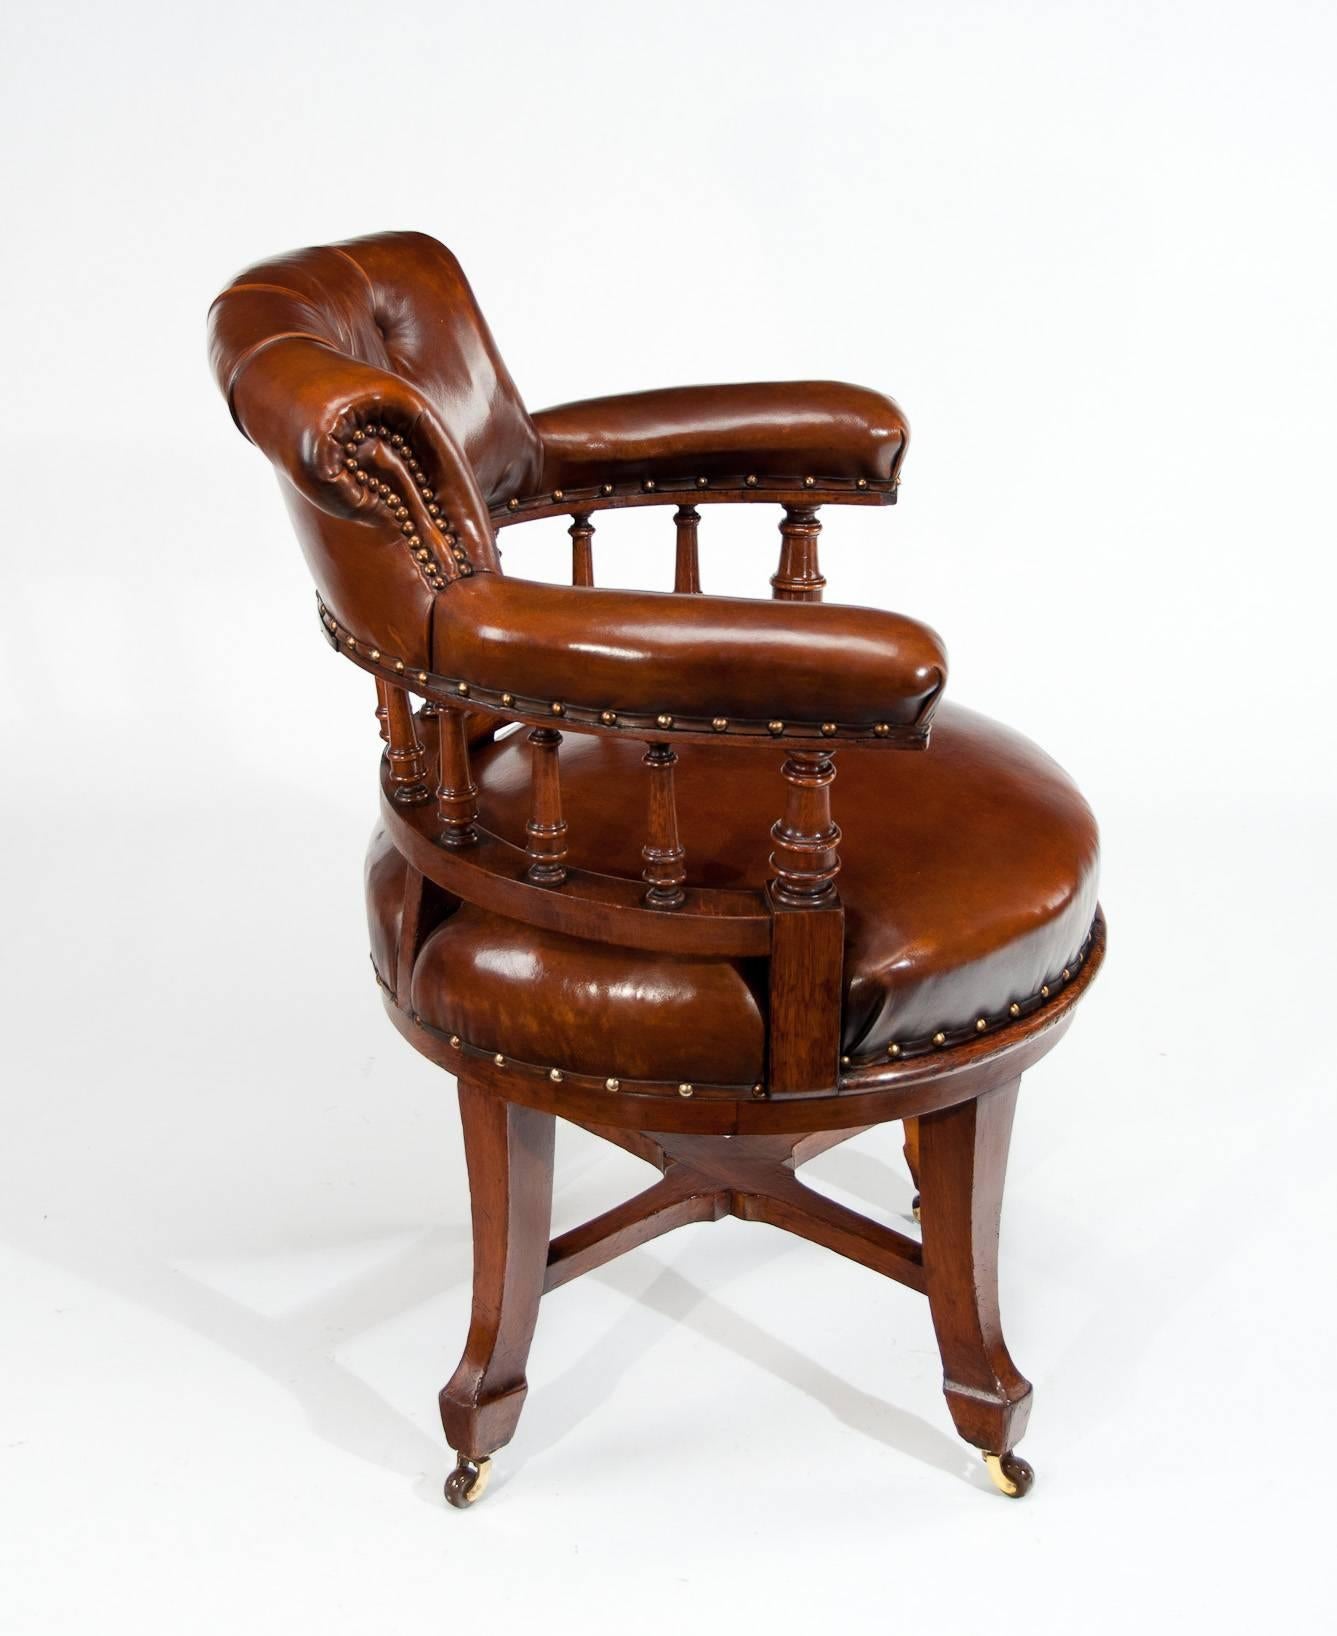 Quality Victorian Oak Leathered Revolving Desk Chair by S & H Jewell 1